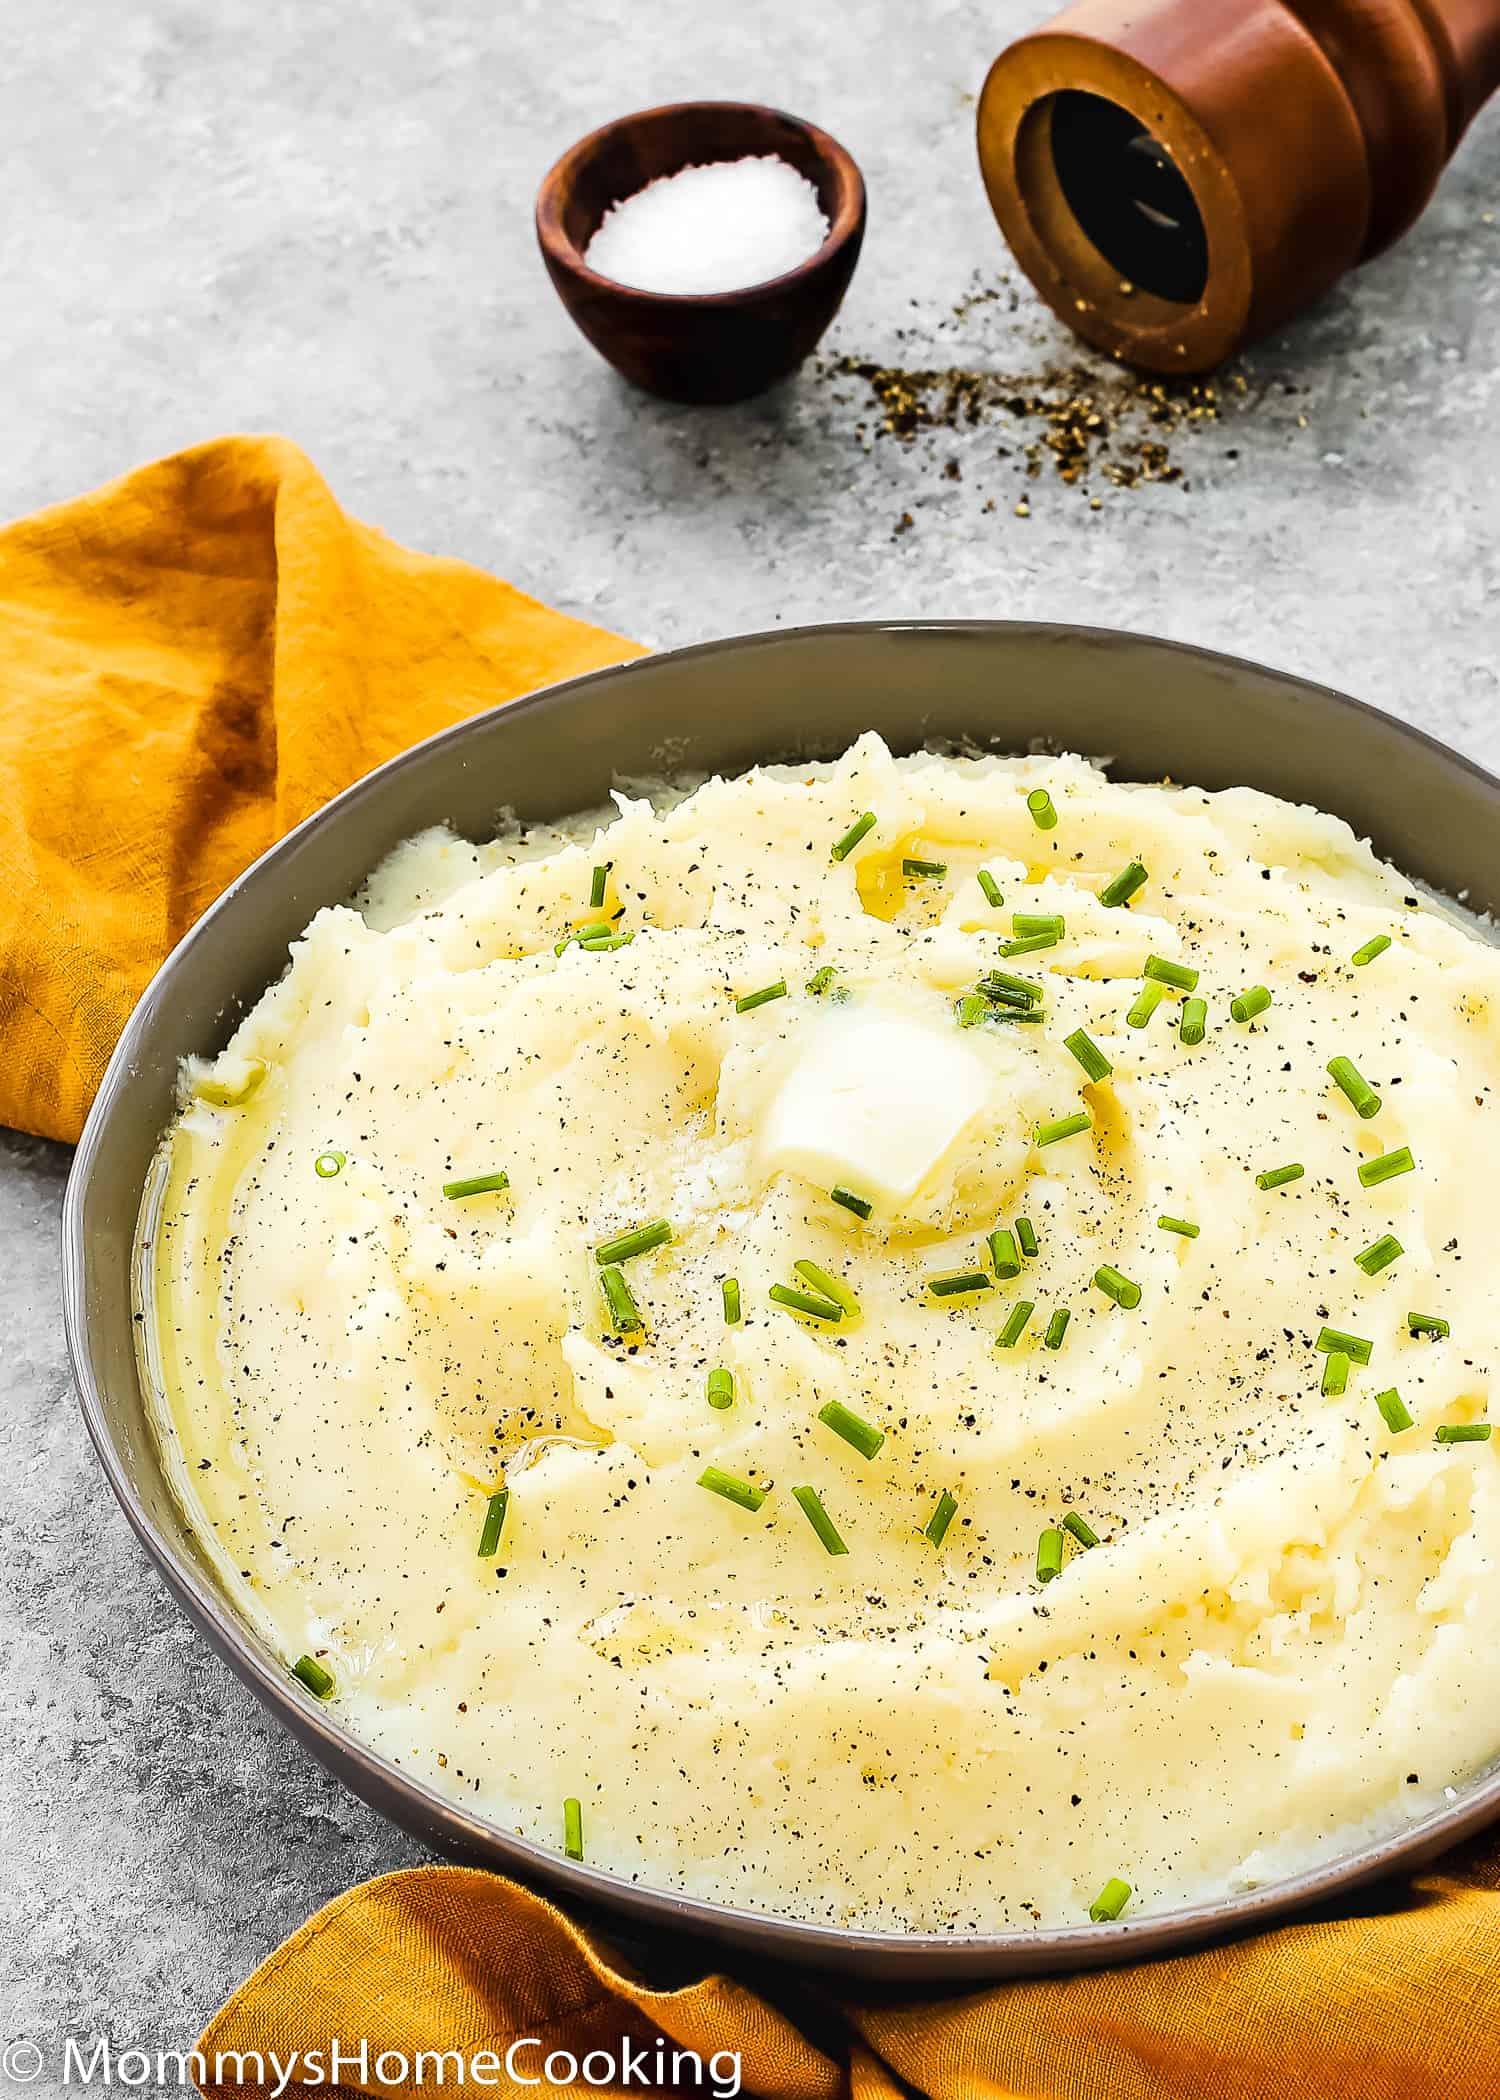 mashed potatoes in a serving bowl with butter and chives on over a gray surface.